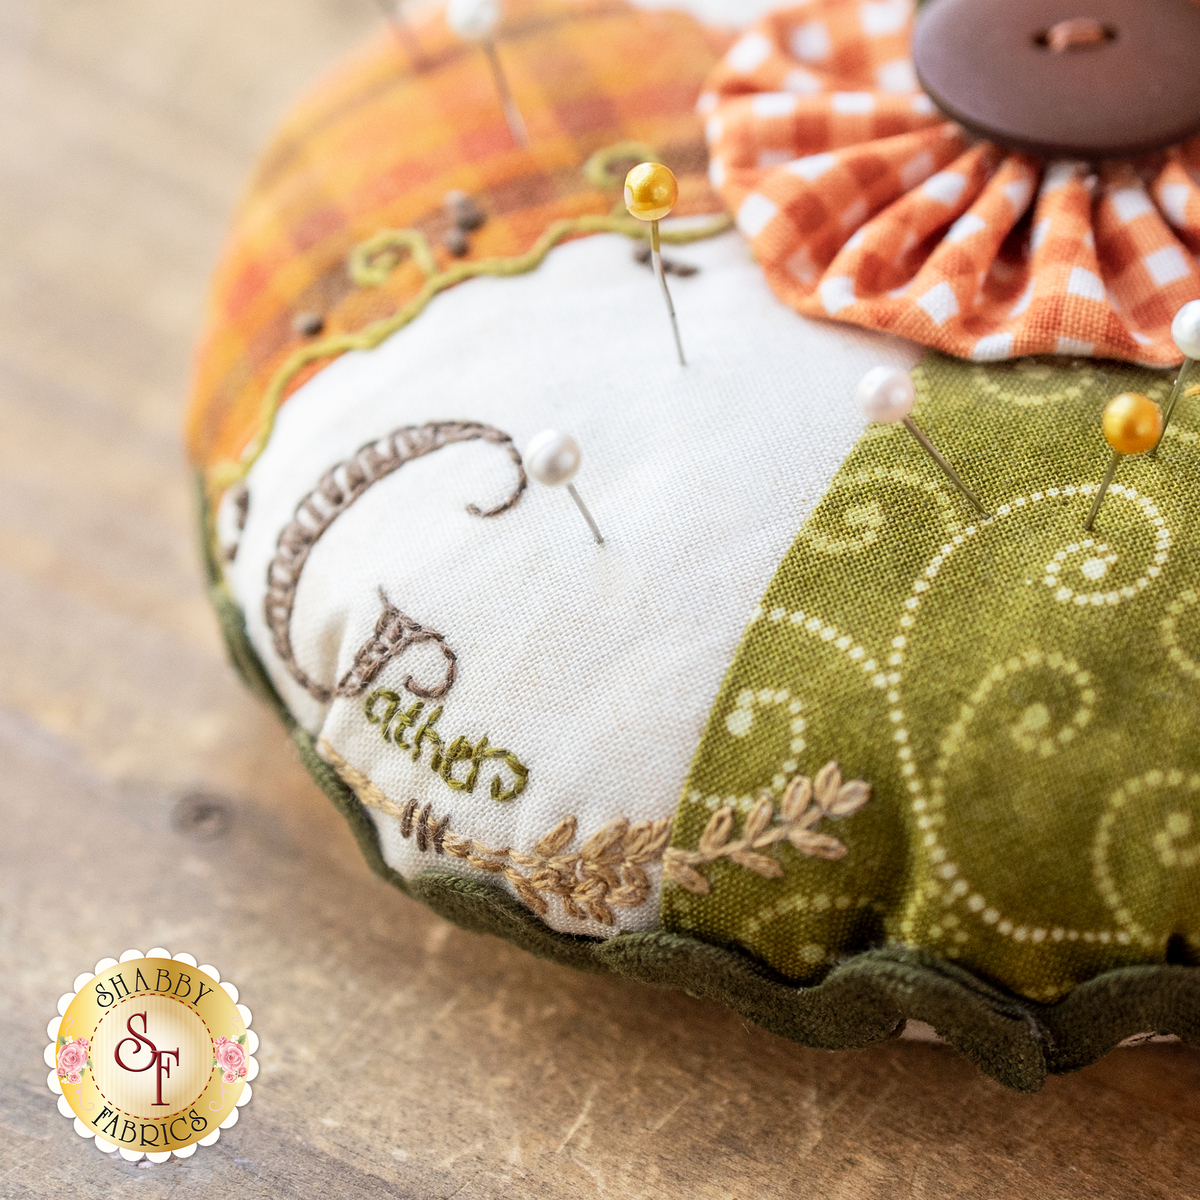 Pin Cushions for Sewing Cute,Sewing Pin Cushion, Pumpkin Sewing Pin  Cushion1 pcs Pumpkin Fabric Sewing Pin Cushion with Elastic Wrist Belt (# 1)